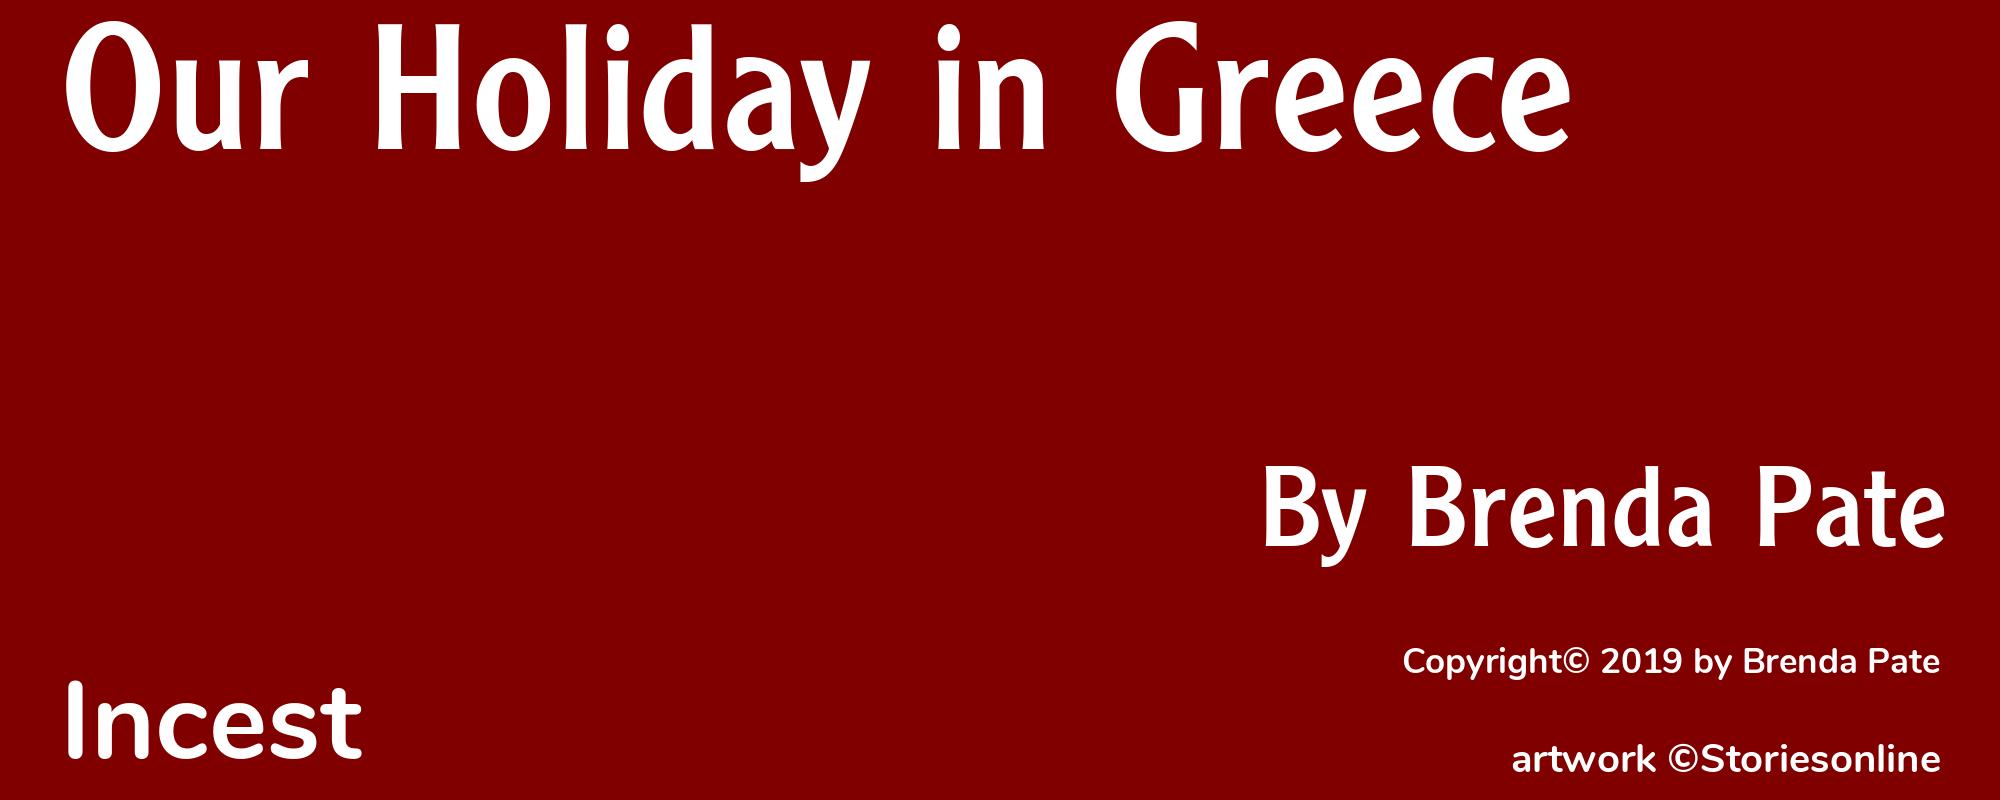 Our Holiday in Greece - Cover